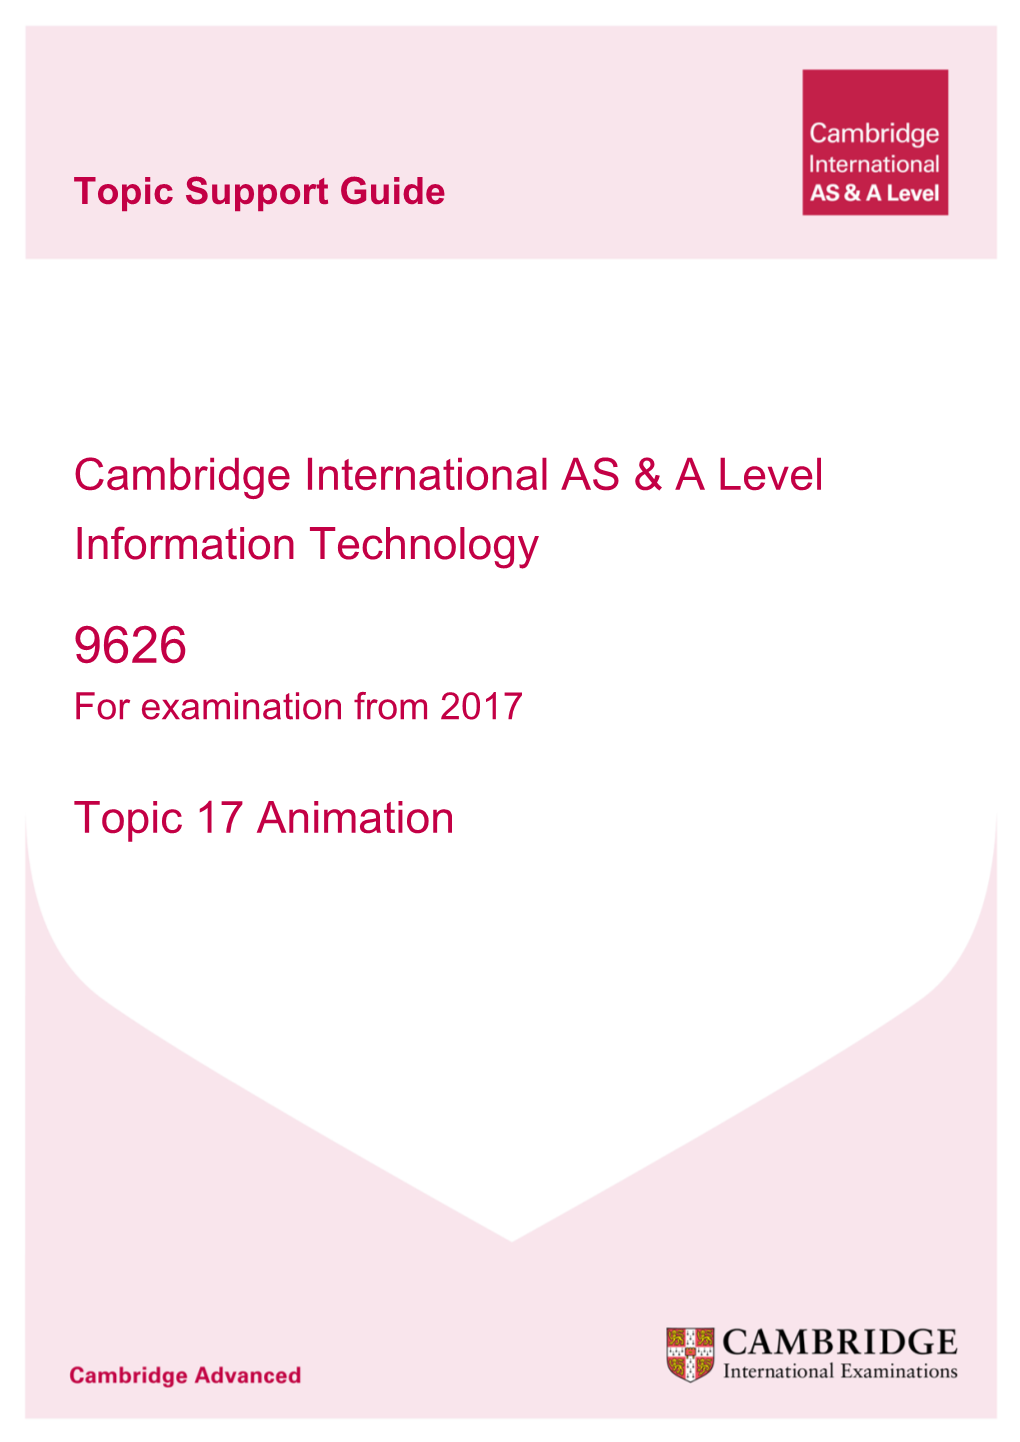 Cambridge International AS & a Level Information Technology Topic 17